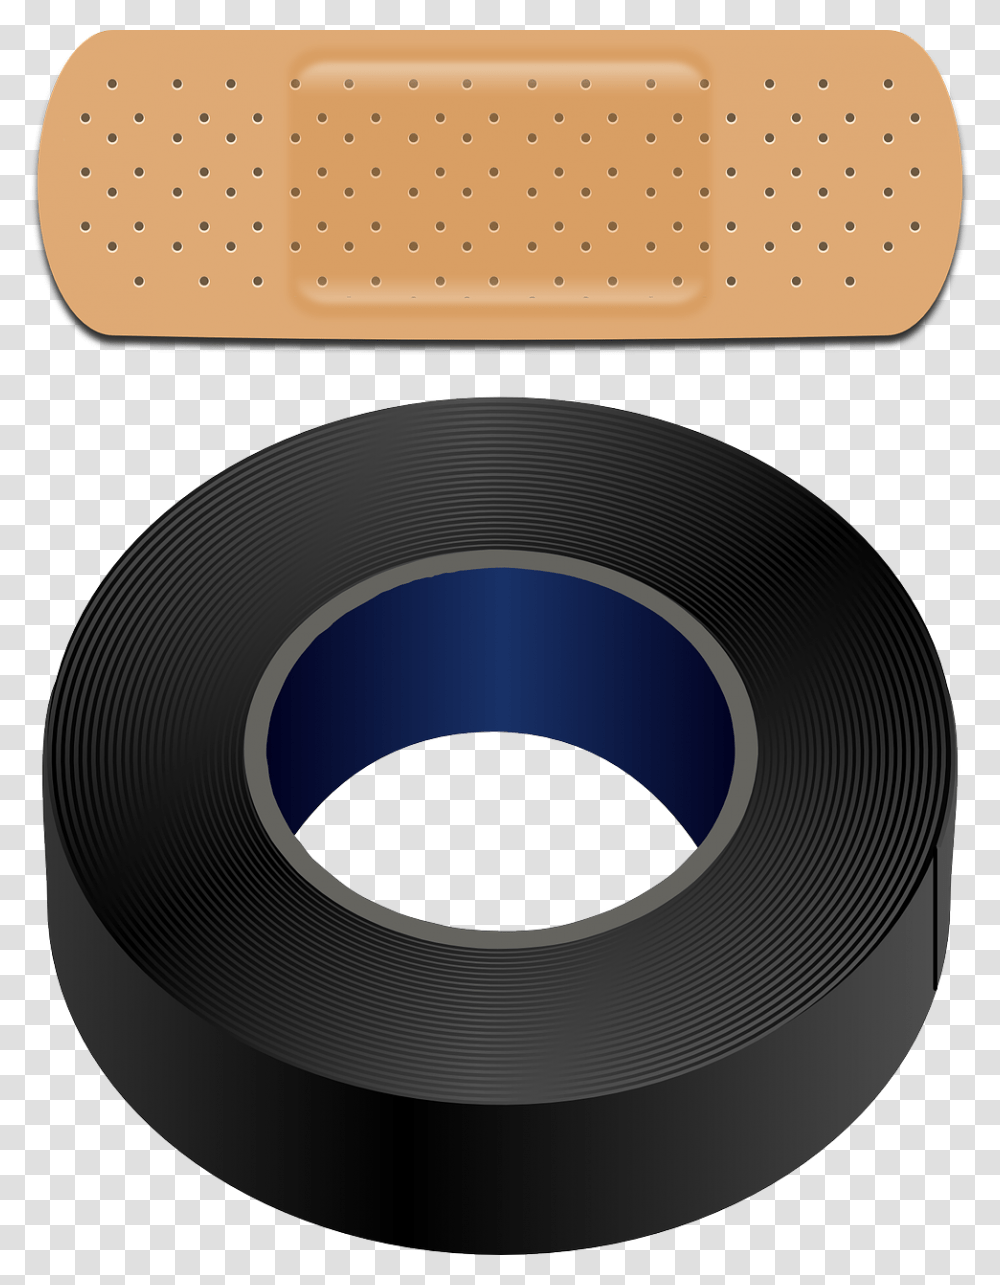 Band Aid Medical Patch, Tape, Rug, First Aid, Bandage Transparent Png